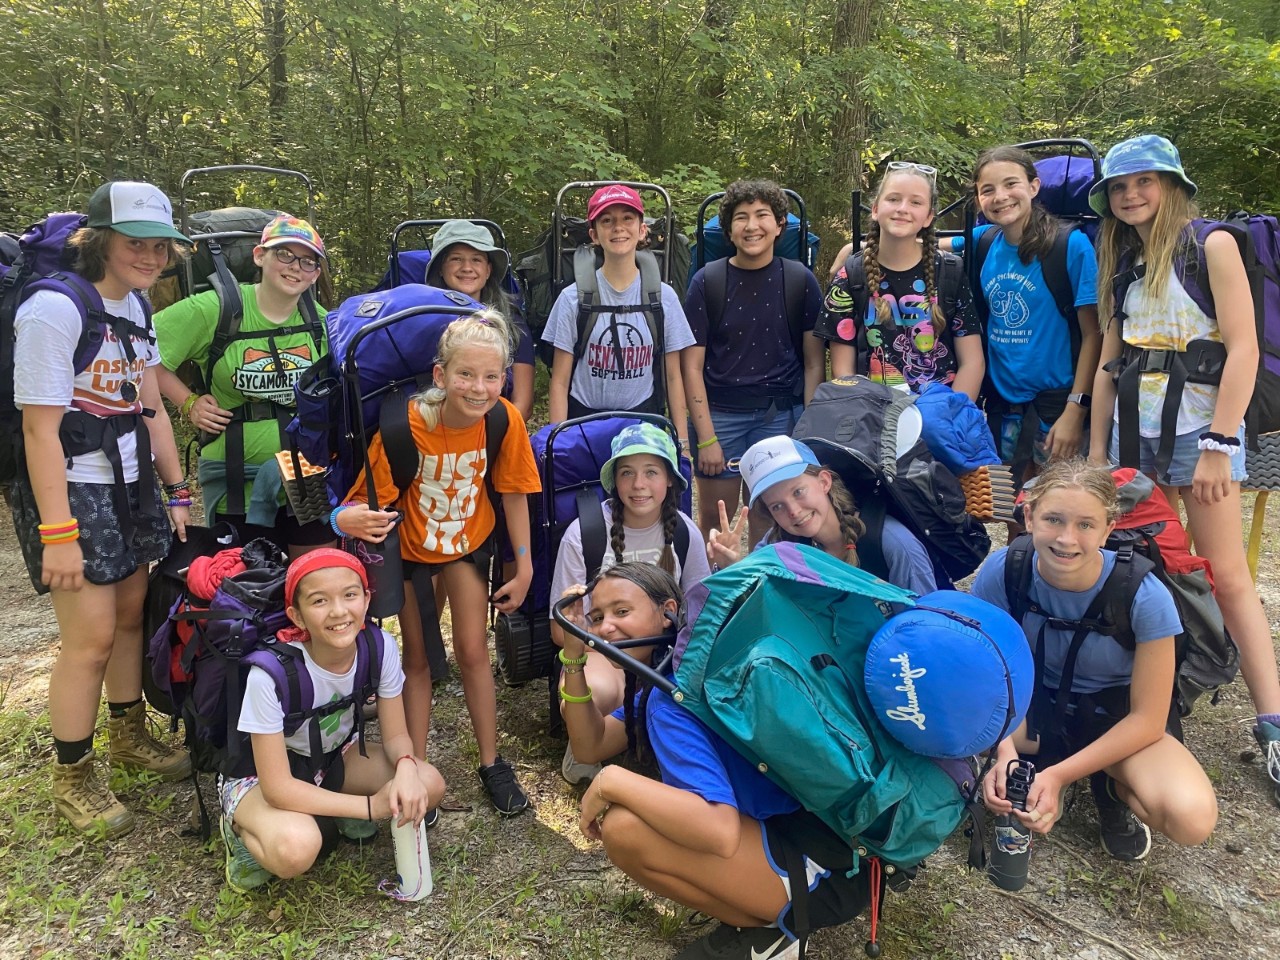 a photo of a diverse group of about 15 young girls in shorts, T-shirts and camping gear like boots and backpacks posing together in the woods and smiling